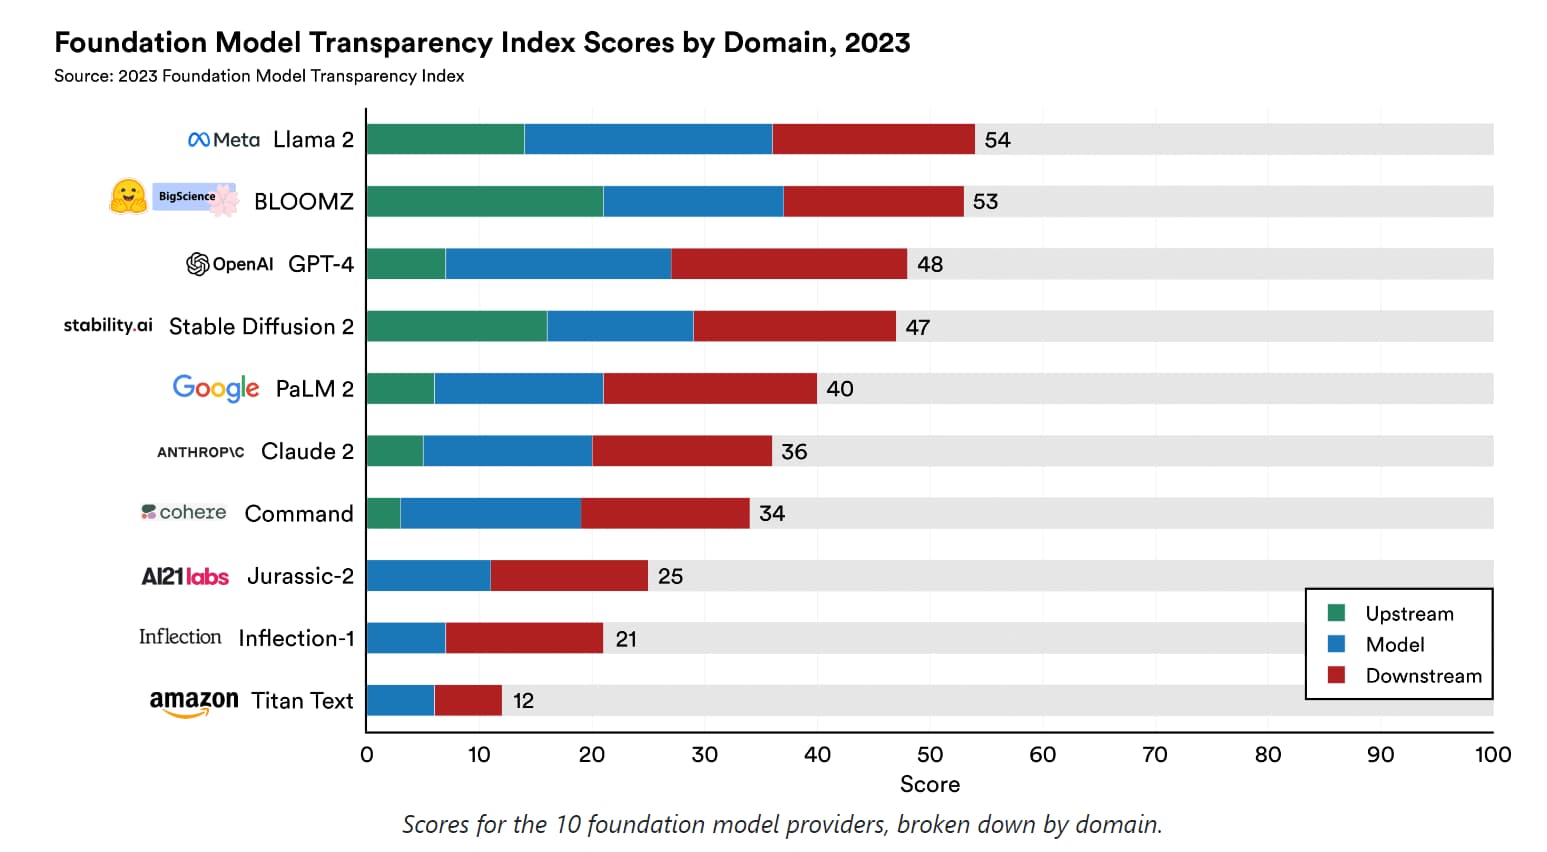 The Foundation Model Transparency Index